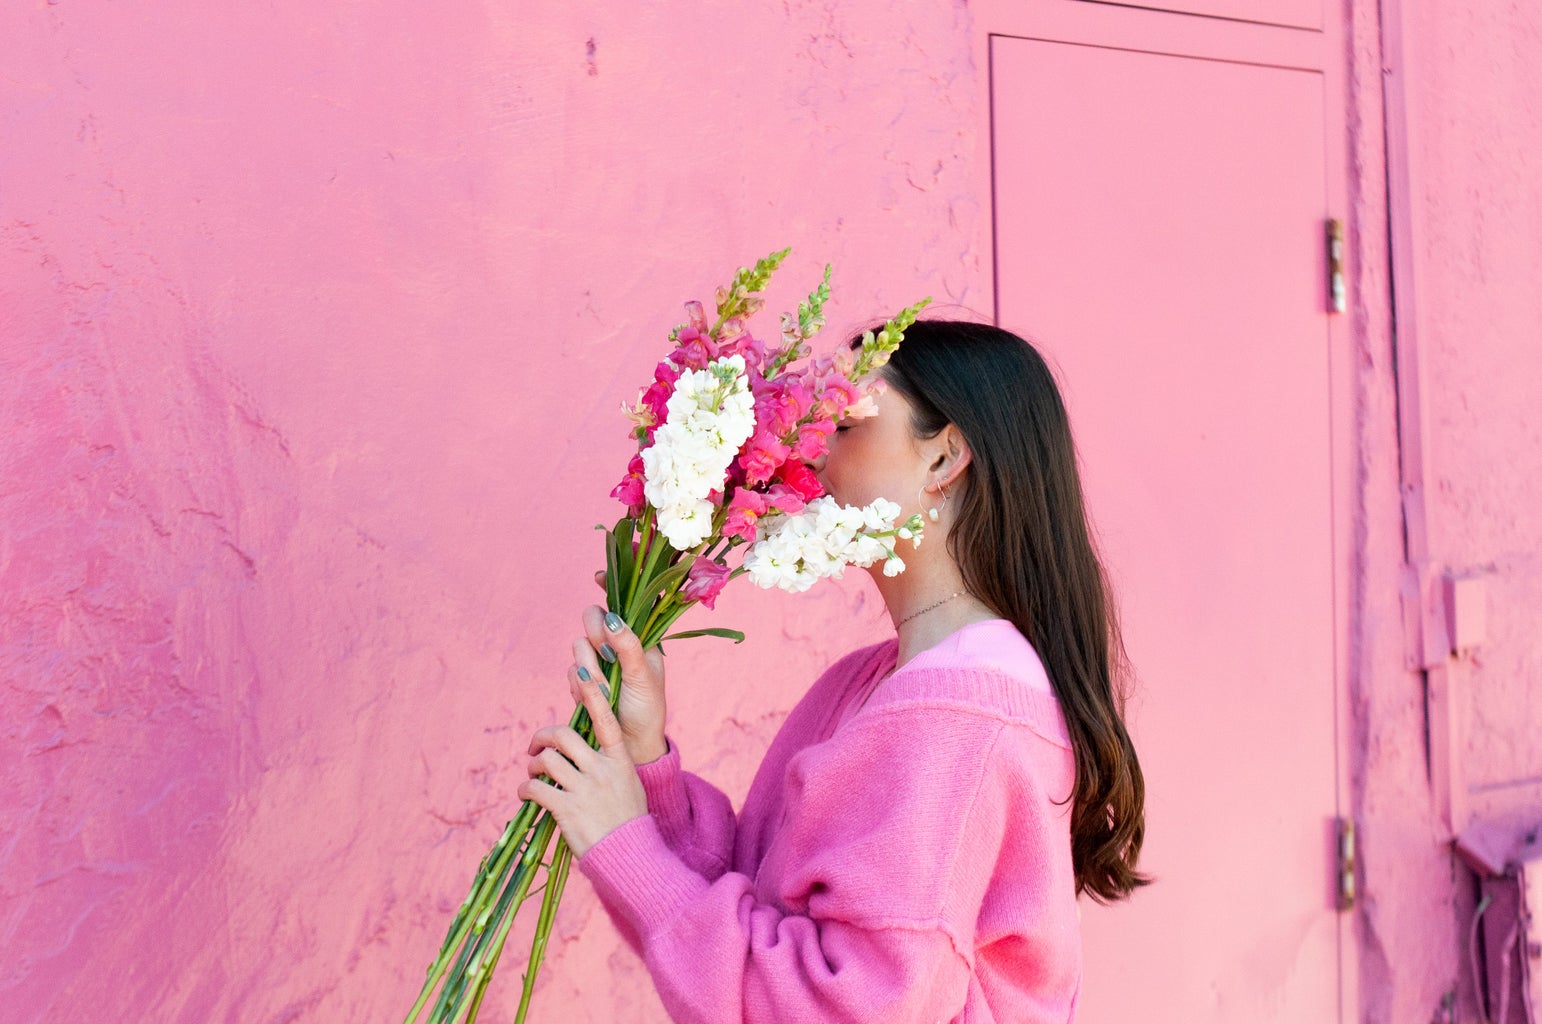 girl holding flowers to her face while wearing pink sweater